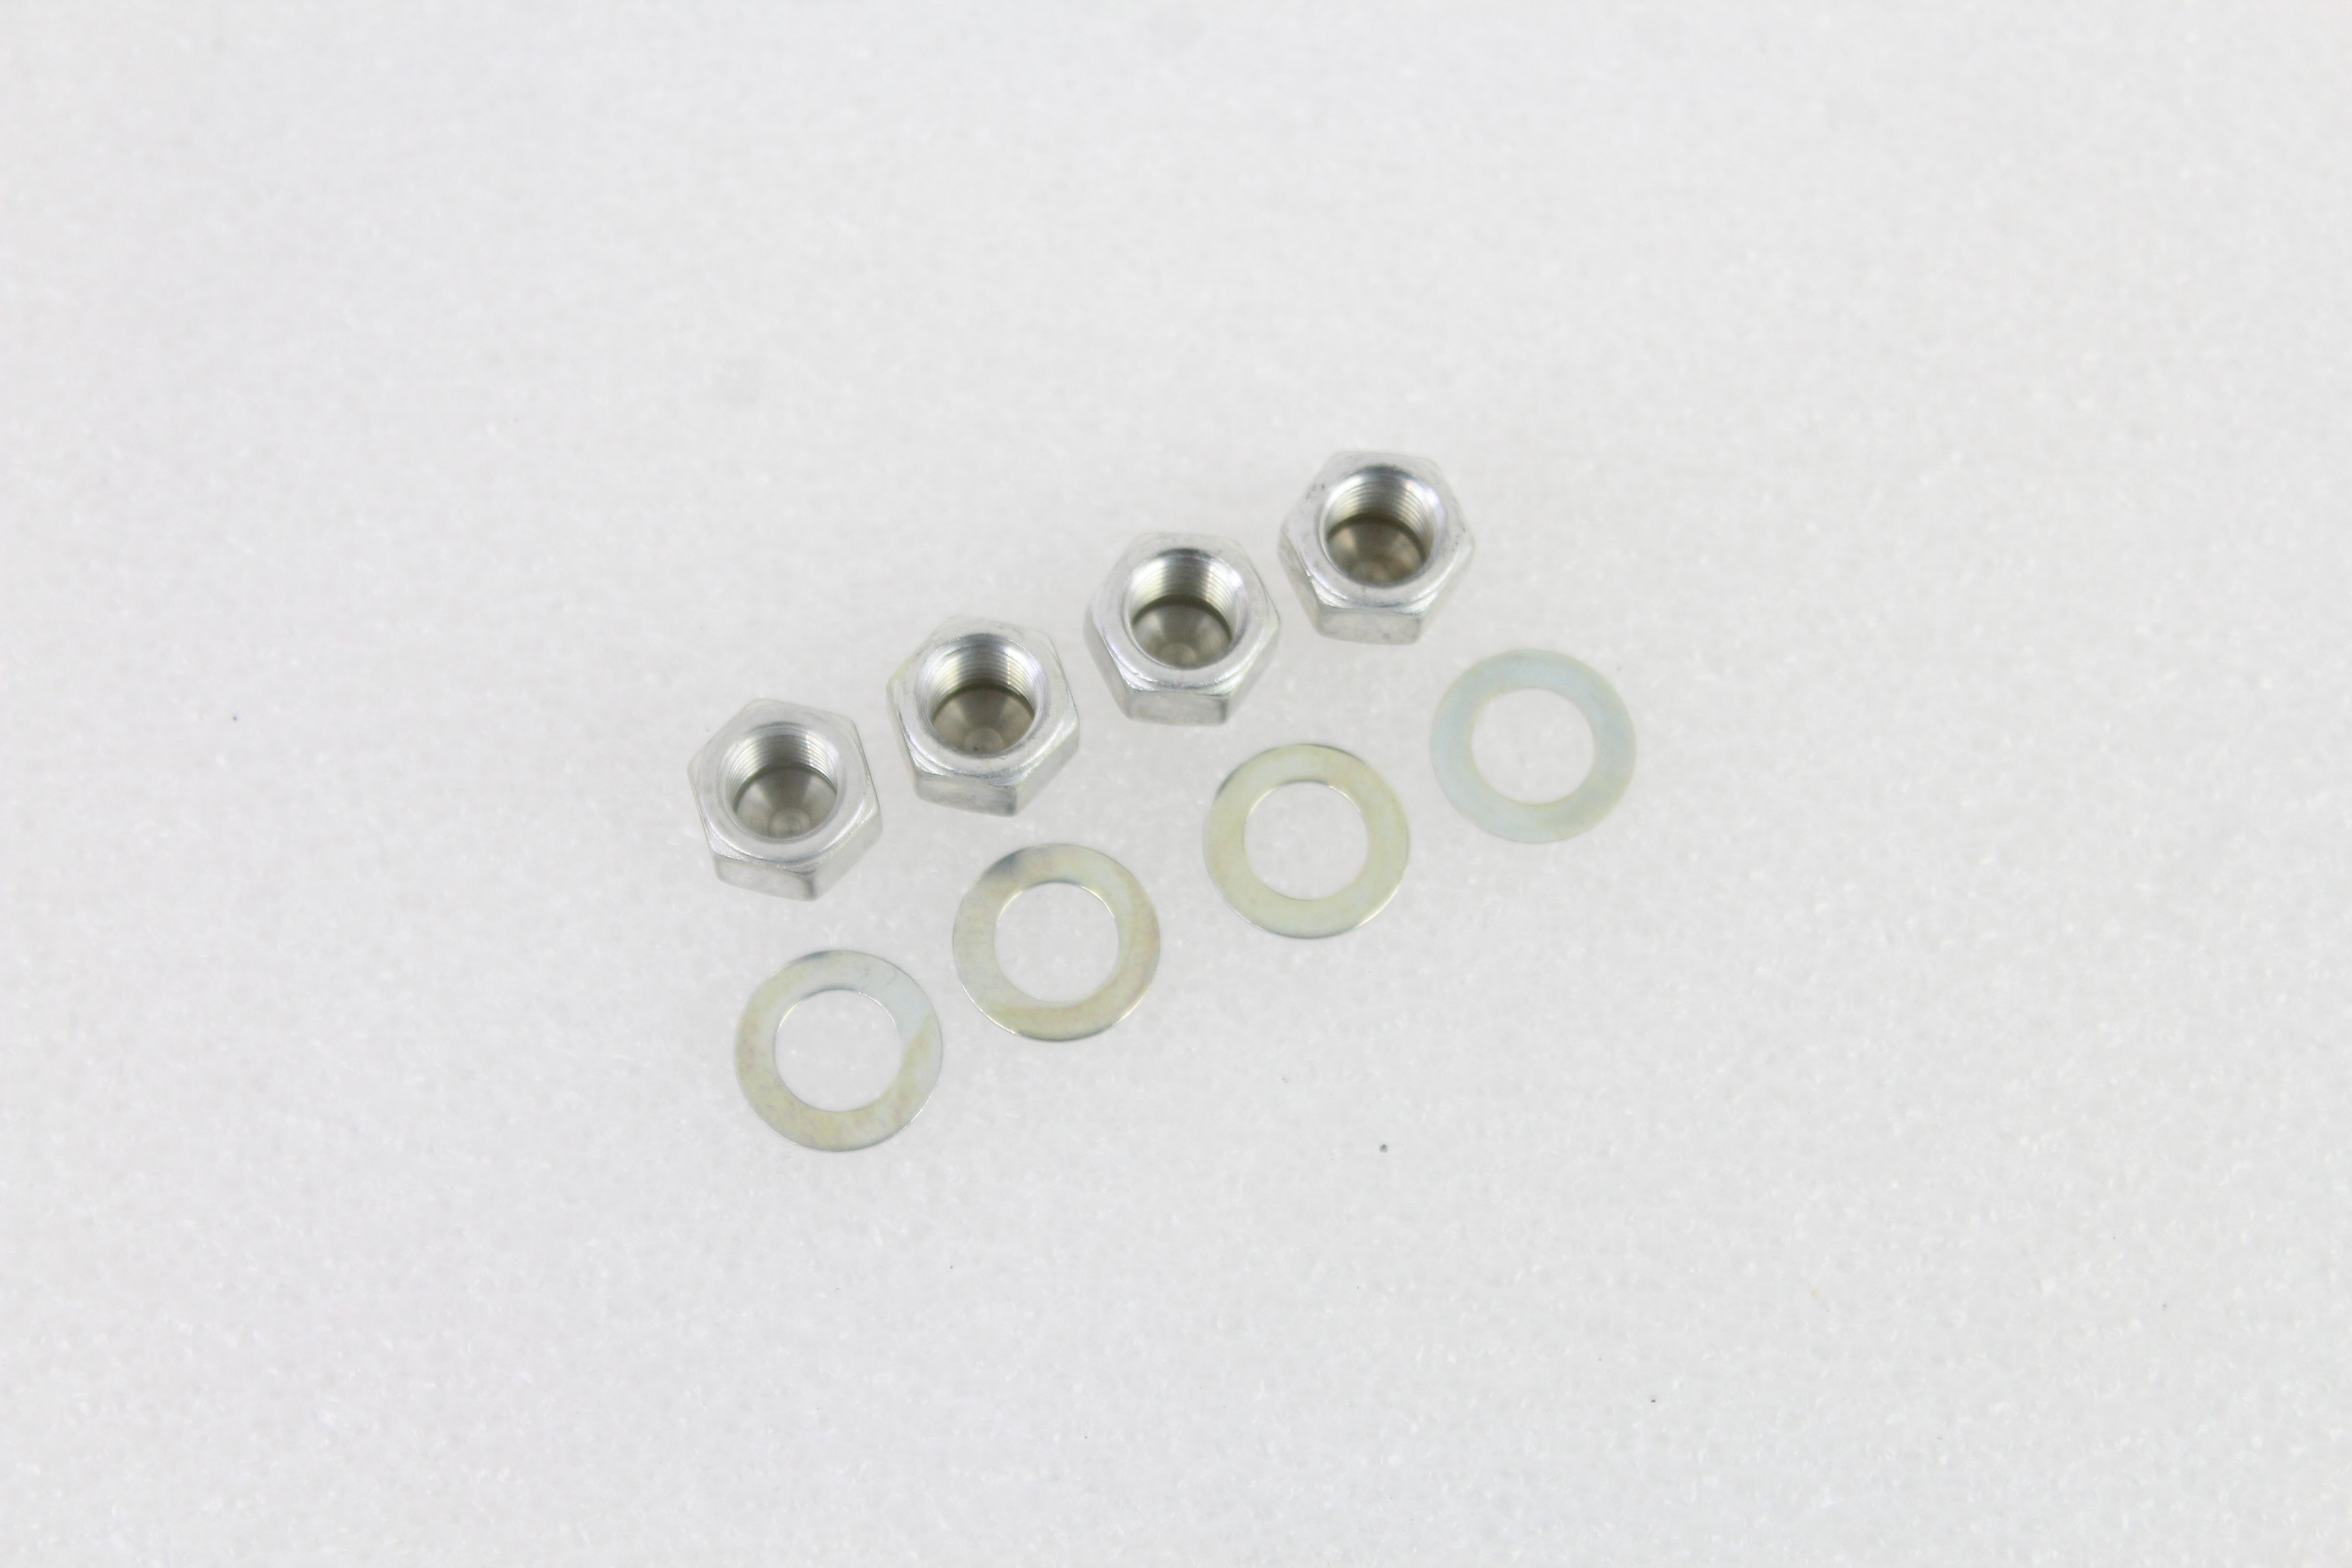 Rocker Shaft Cadmium End Cap Type Nuts with Washers